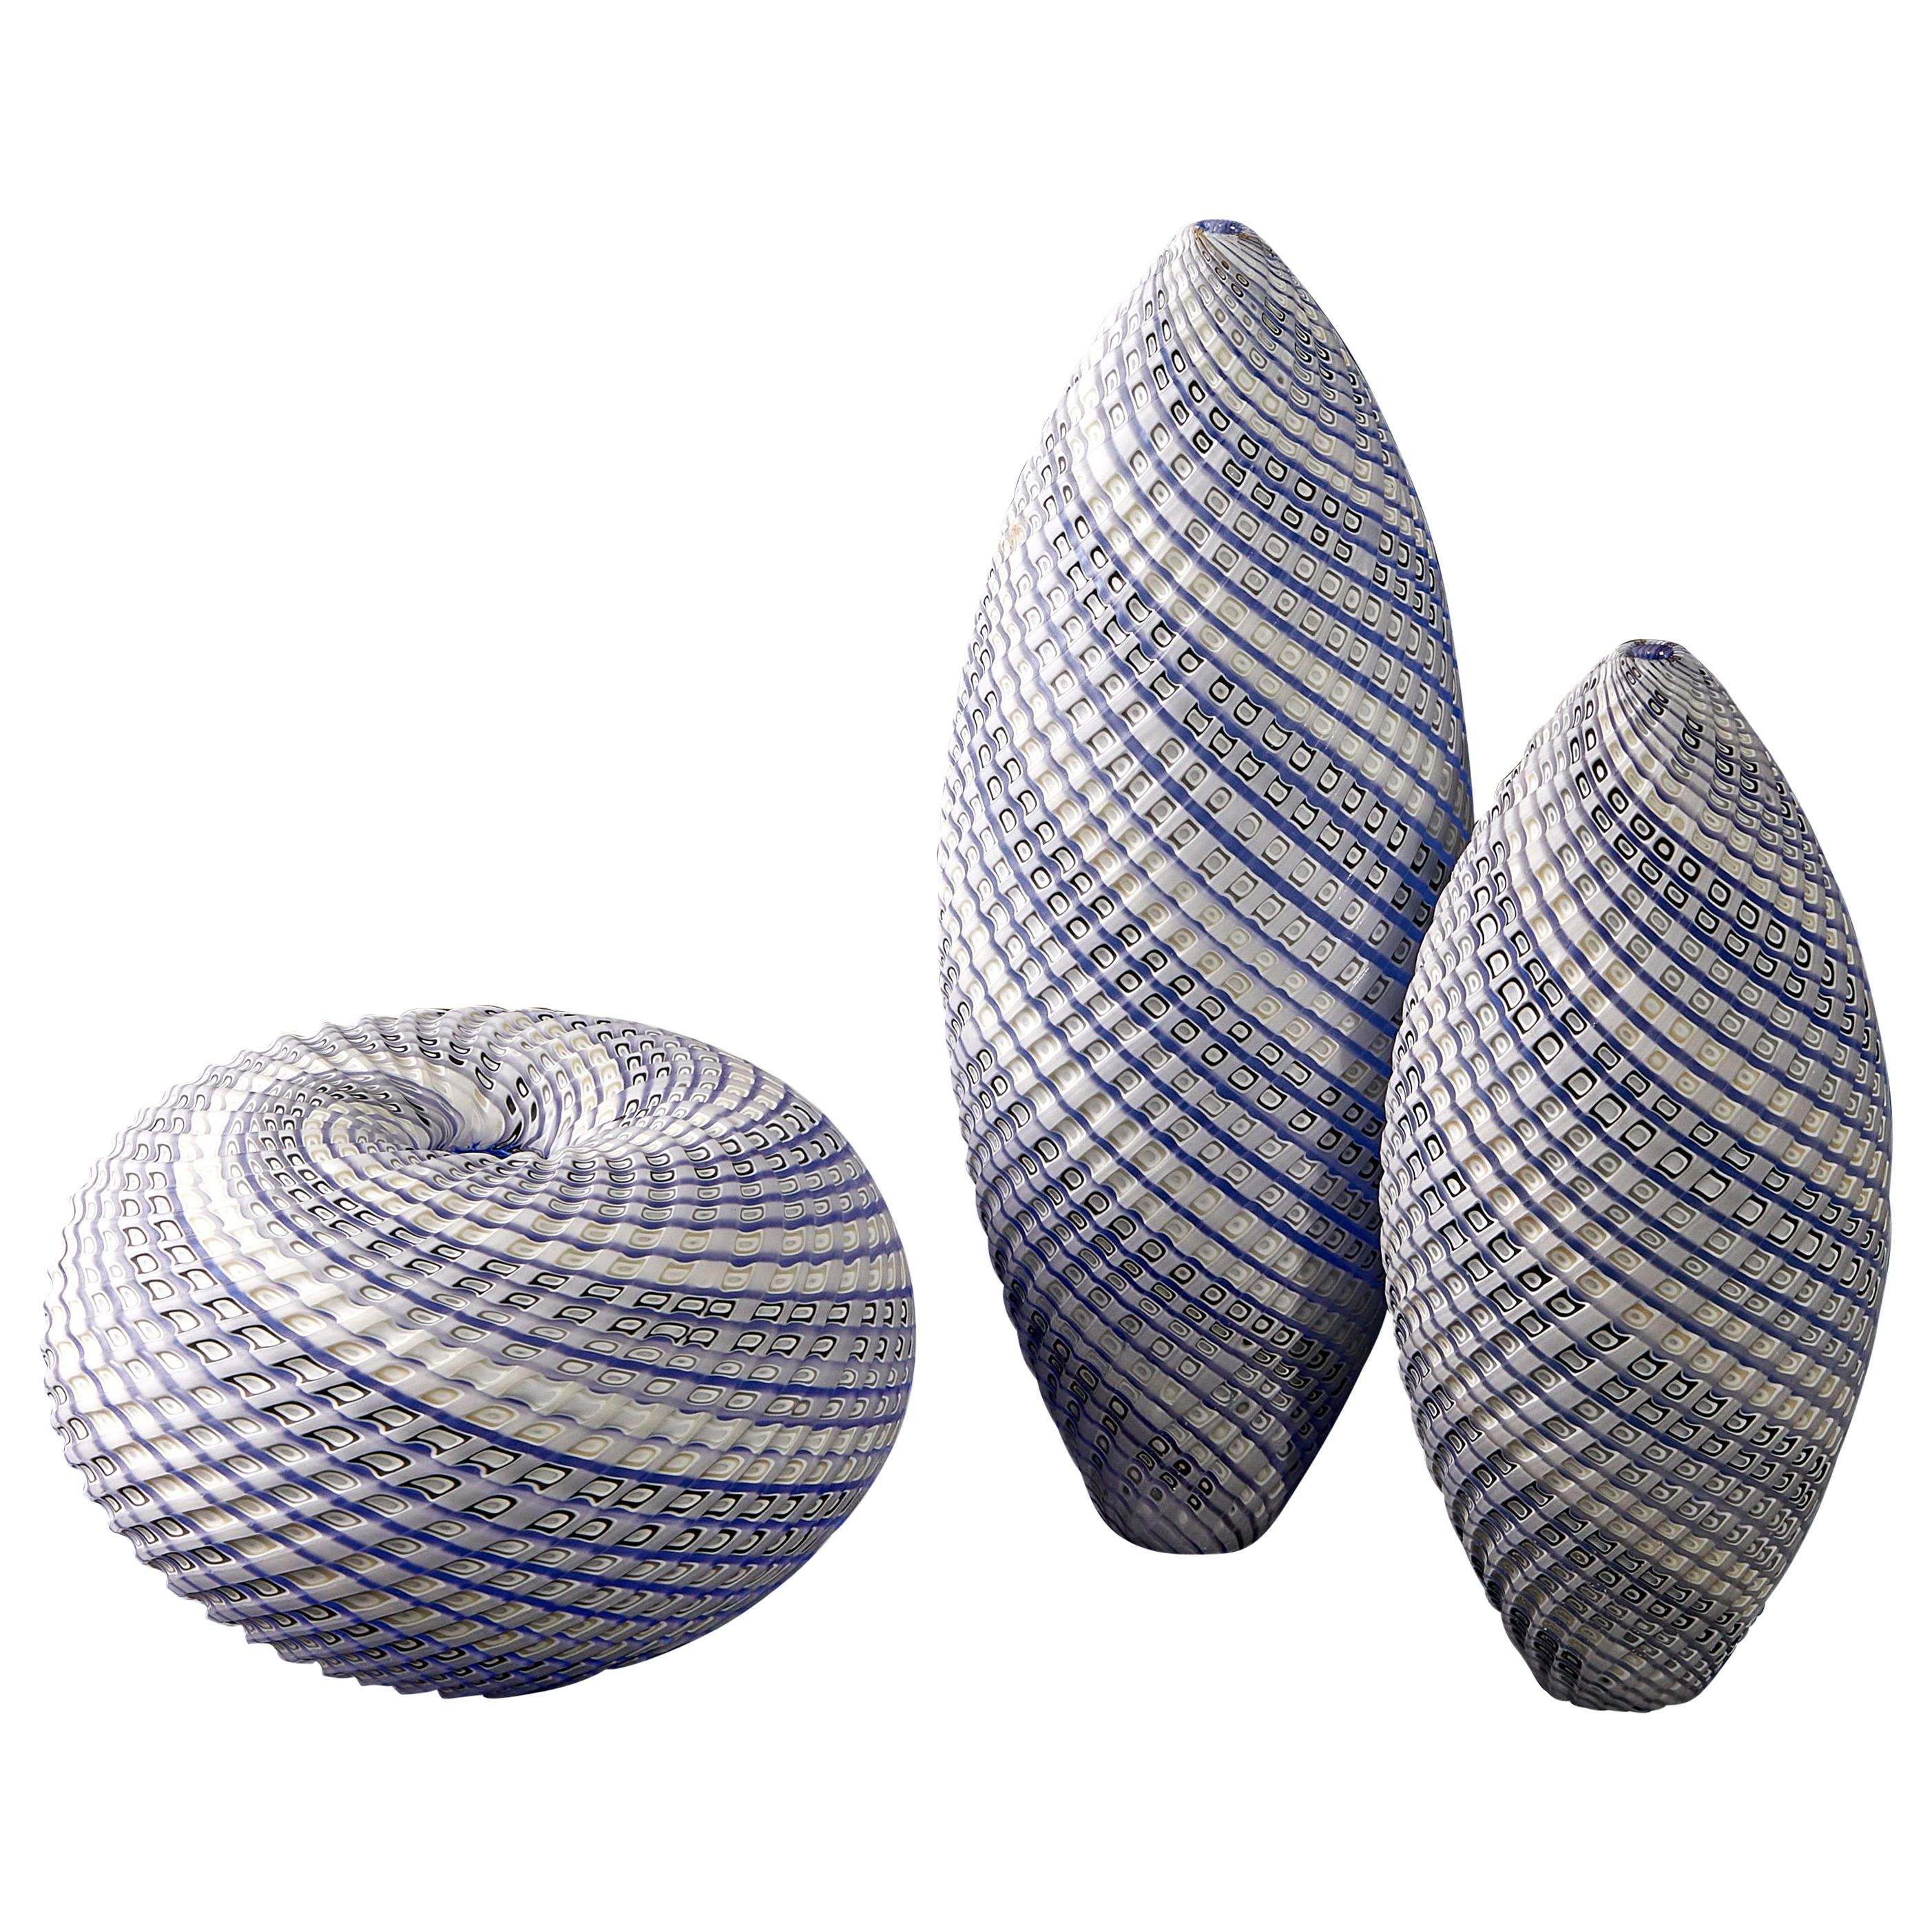 Woven Three Tone Blue Trio, a Blue and White Glass Installation by Layne Rowe